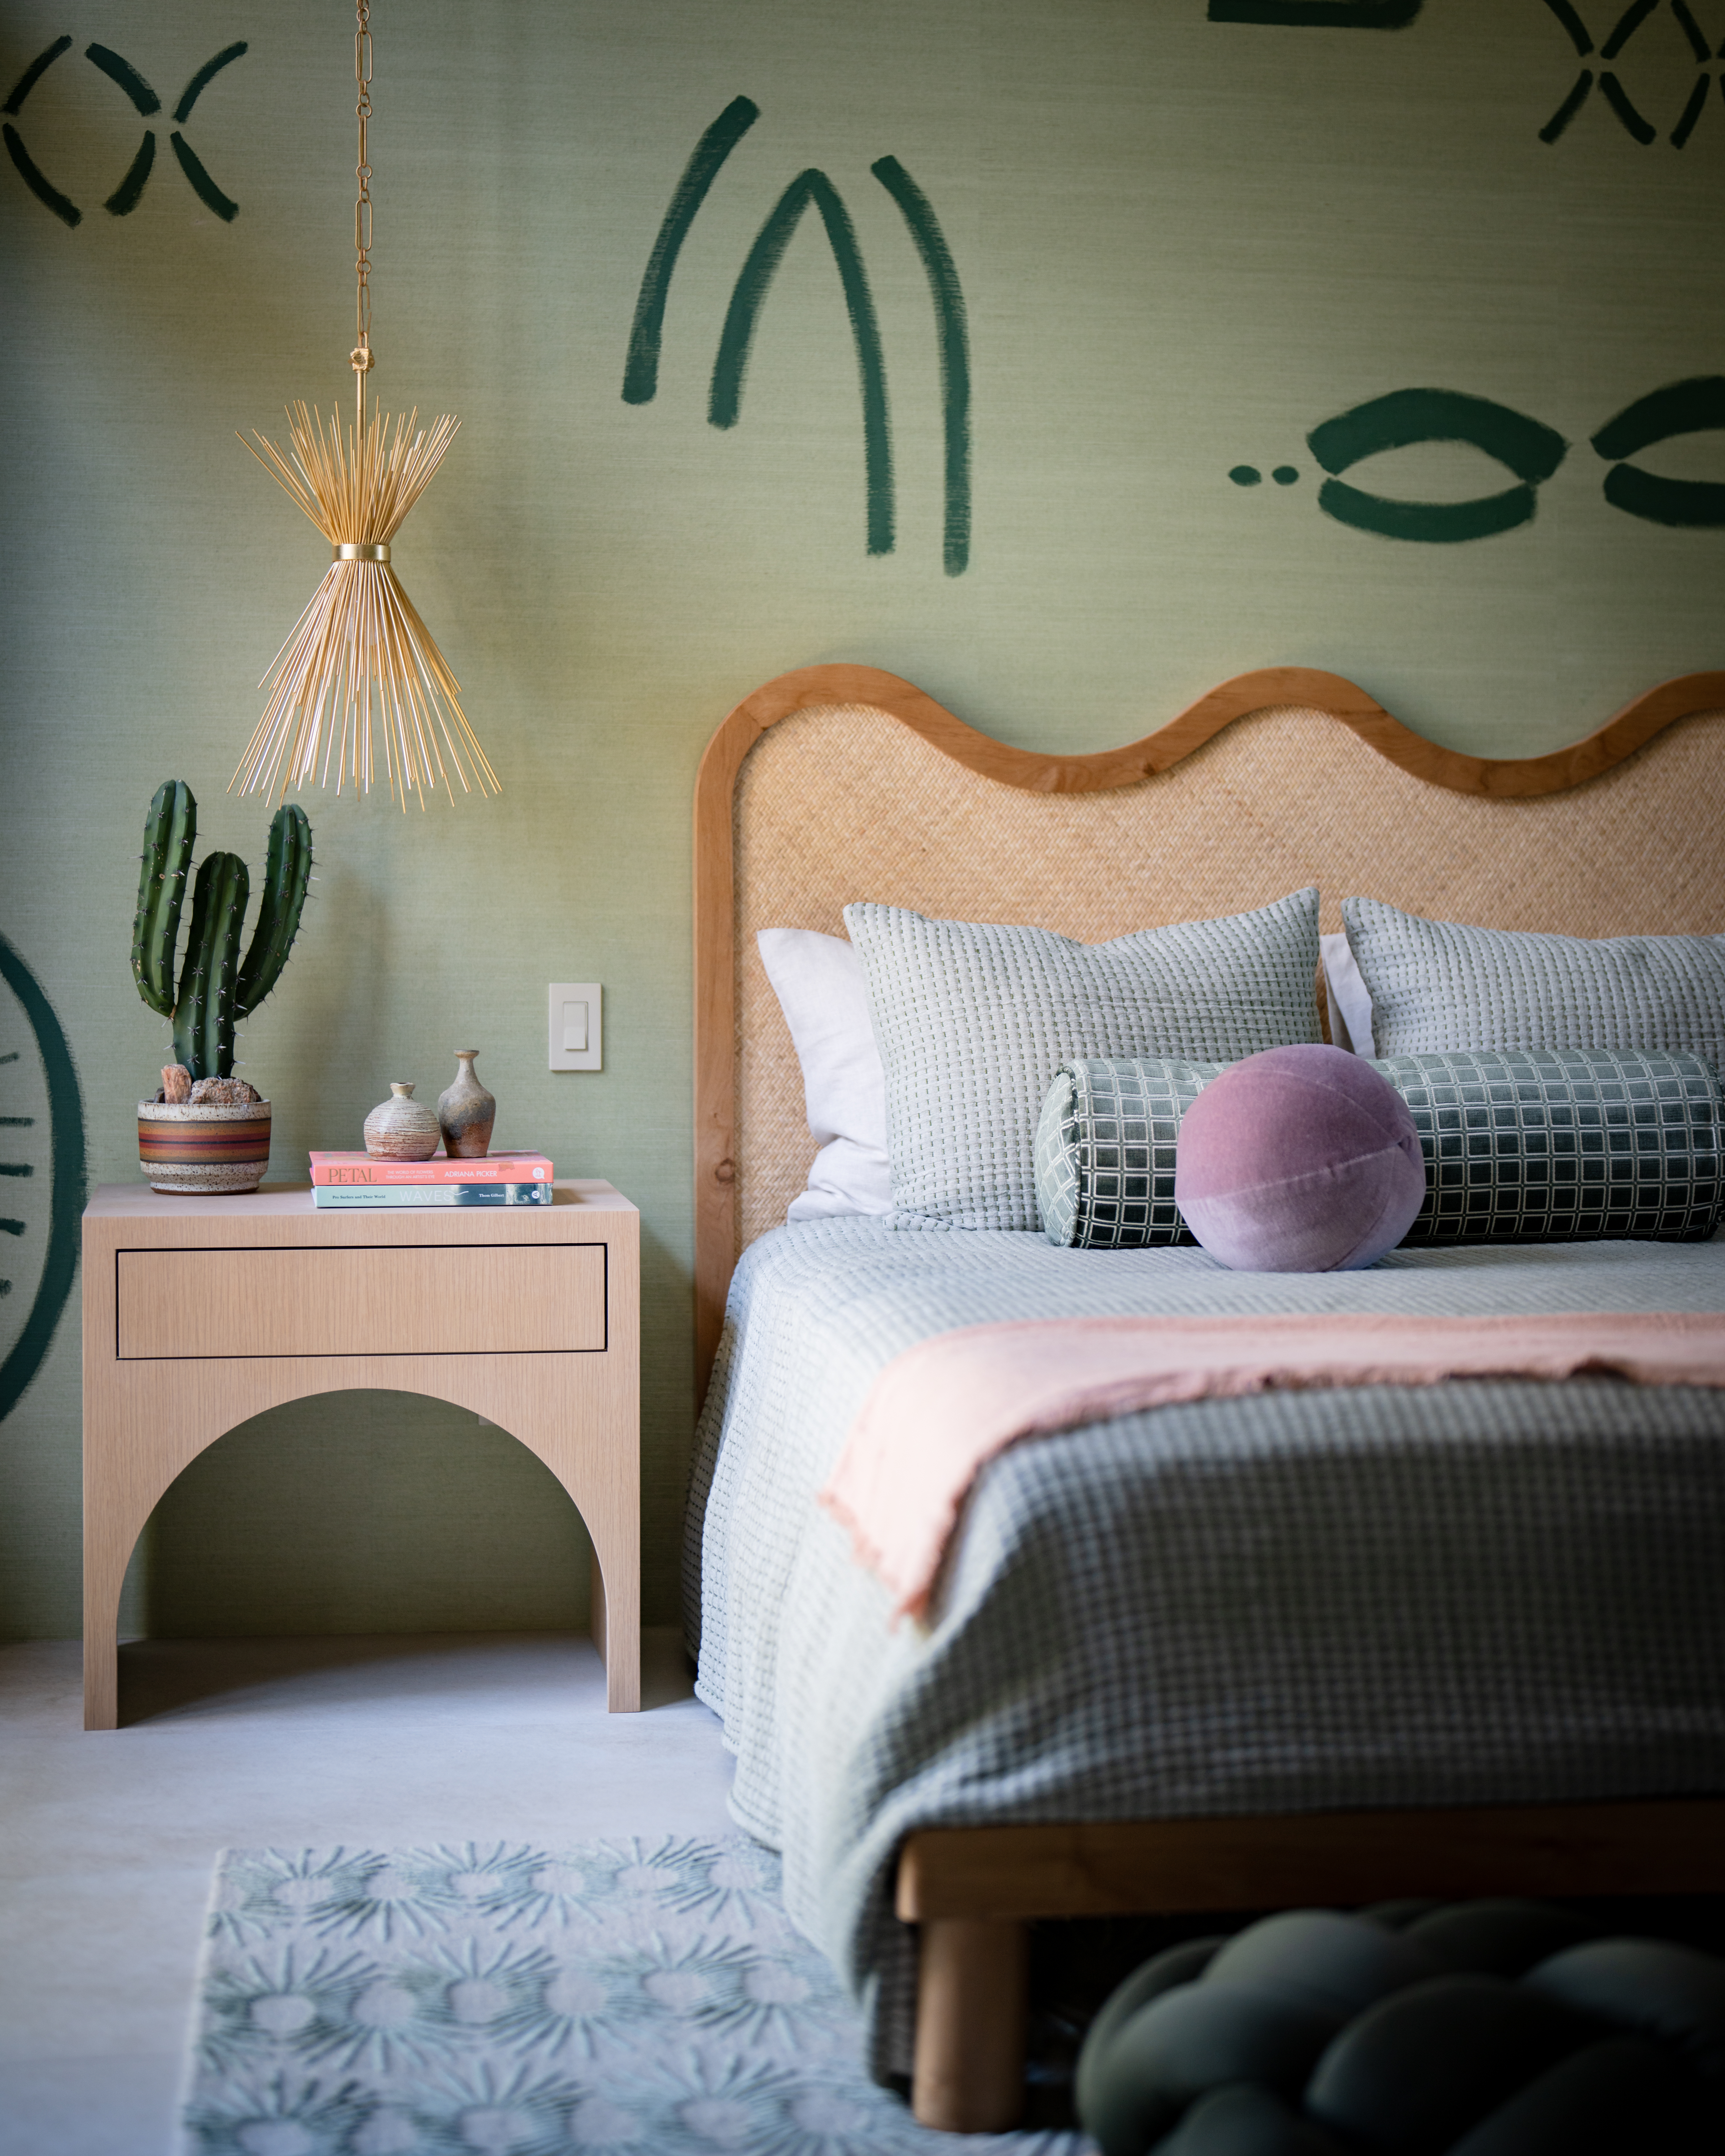 Island Feast, seen in the dining room, inspired the hand-painted grass-cloth mural in this bedroom by Jen Samson of Jen Samson Design. The arch of the nightstand echoes the undulating headboard—and the shape of the ball pillow. 
